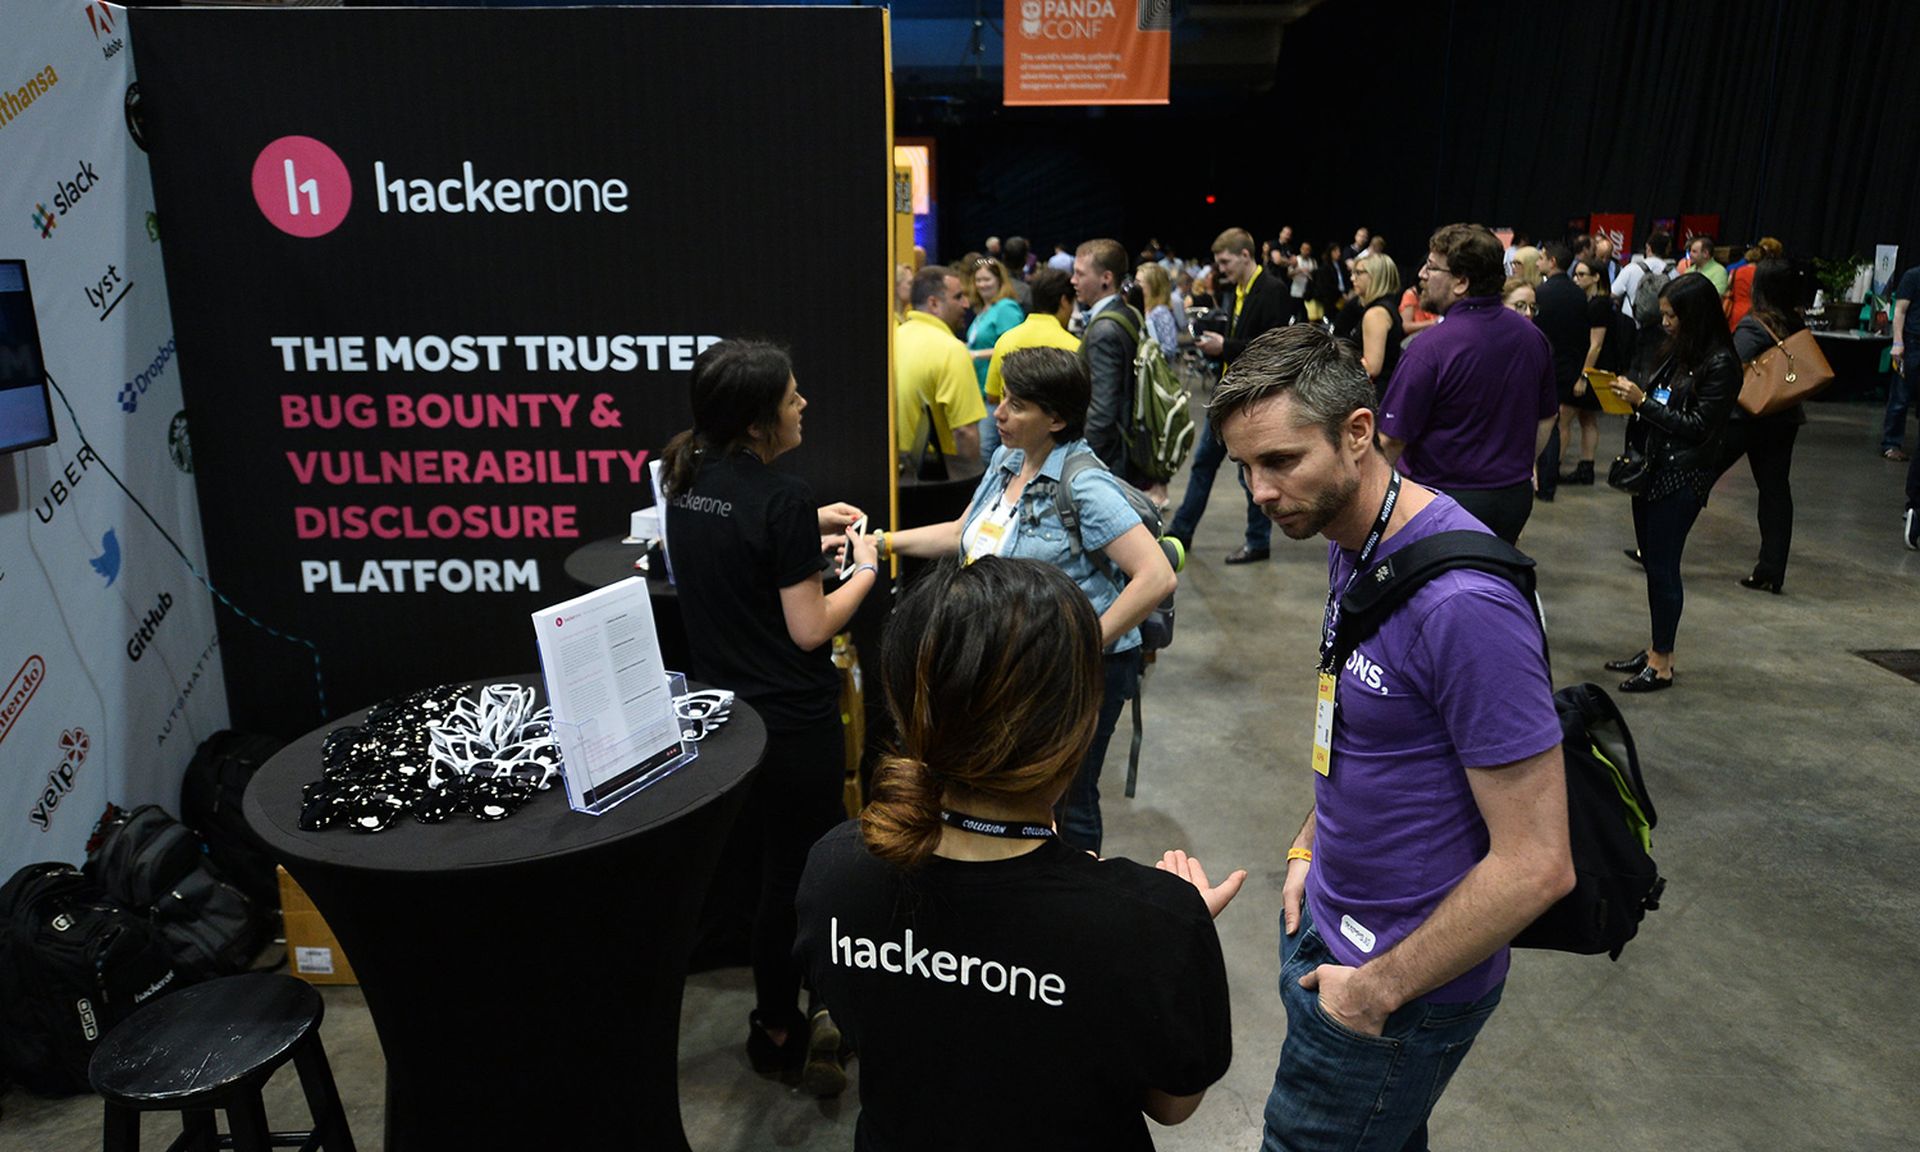 Attendees at HackerOne at Collision 2017 in New Orleans on May 2, 2017. (Photo by Diarmuid Greene / Collision / Sportsfile | &#8220;DG2_4955&#8221; by collision.conf is licensed under CC BY 2.0)